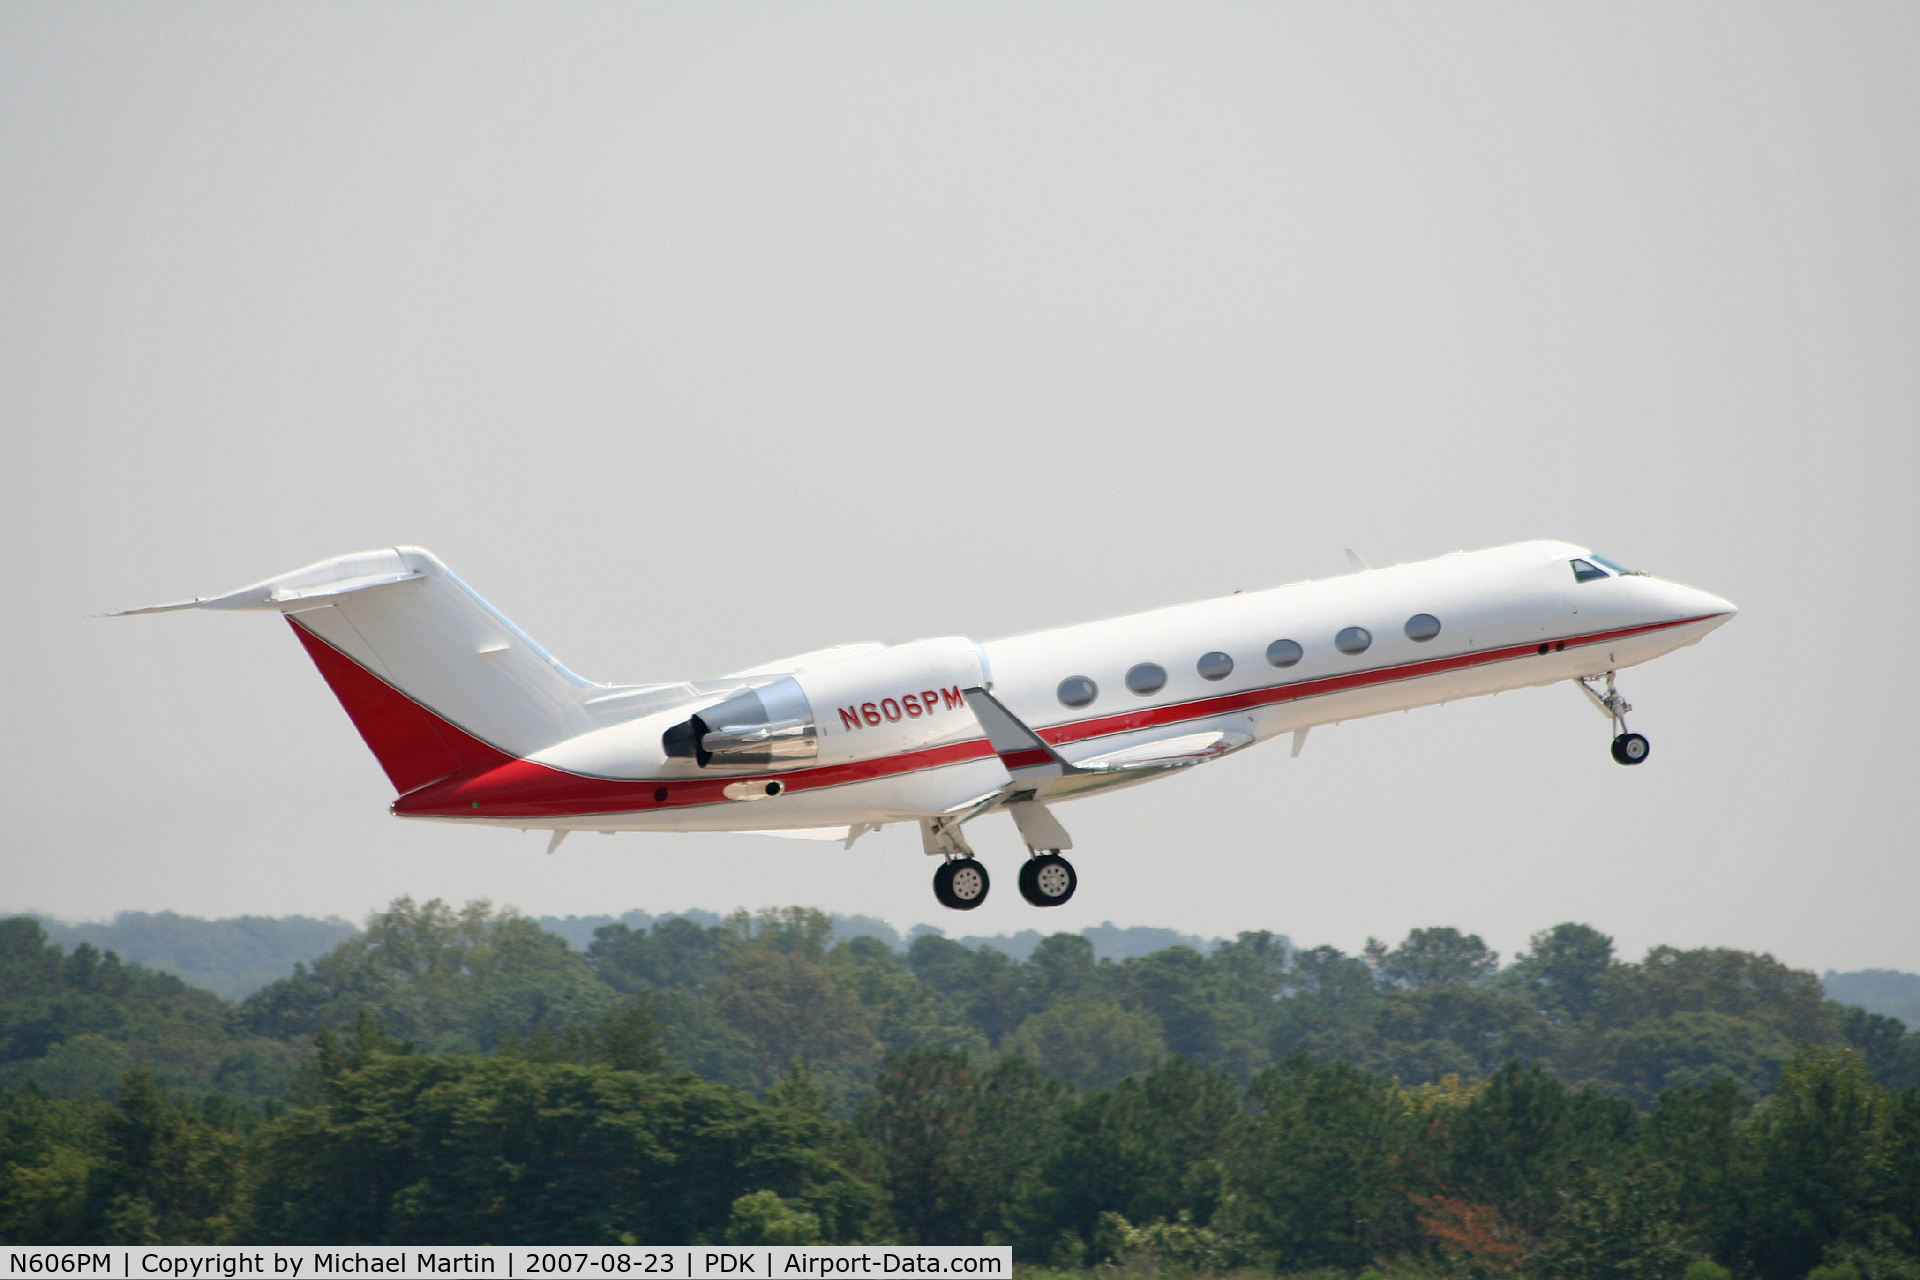 N606PM, 2003 Gulfstream Aerospace G-IV C/N 1512, Departing PDK for parts unknown!